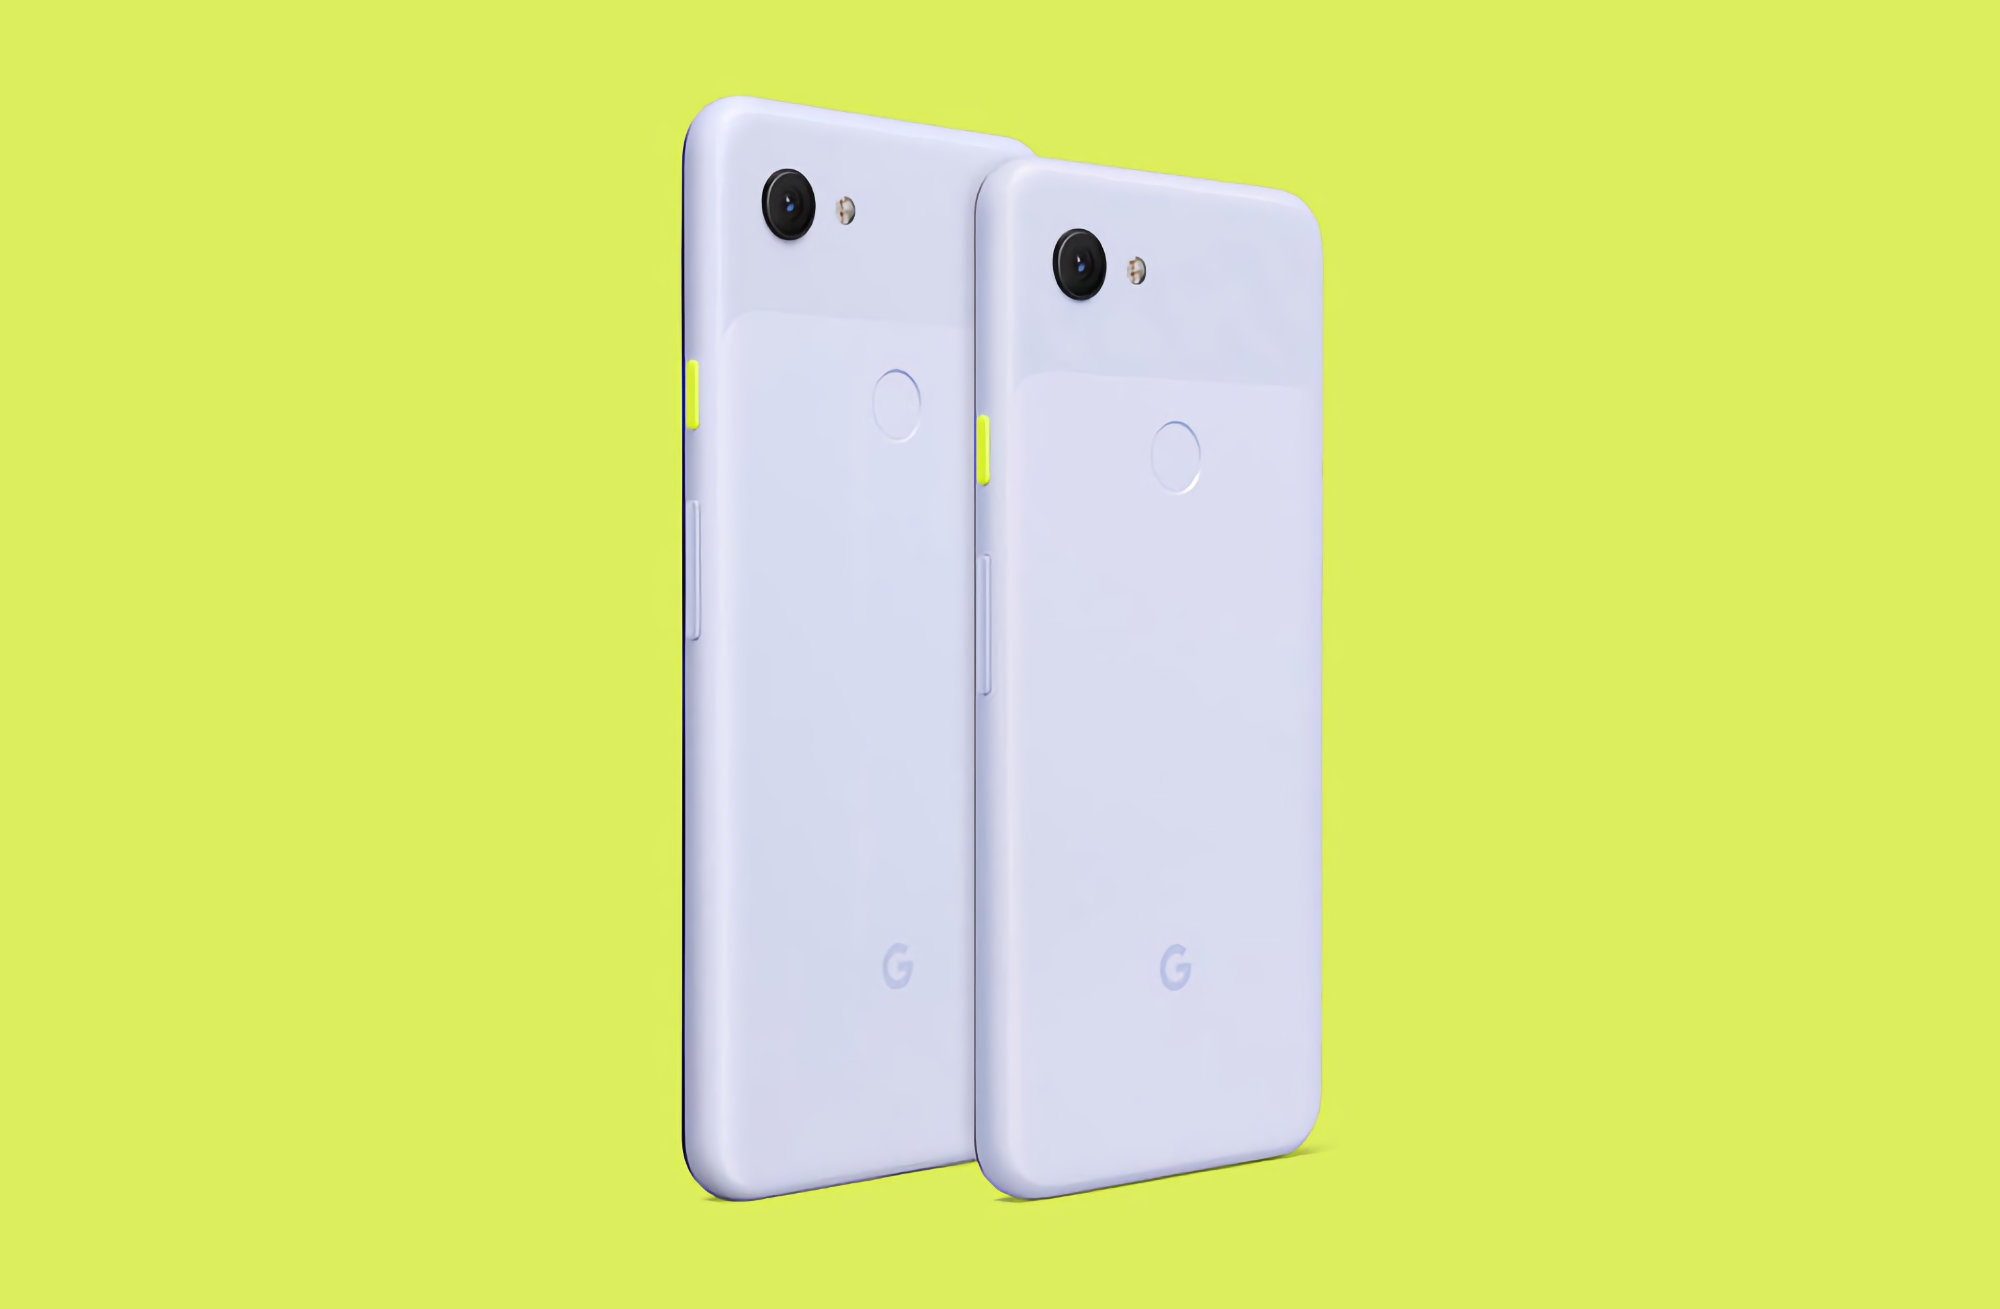 Google reveals when it will release the latest update for Pixel 3a and Pixel 3a XL